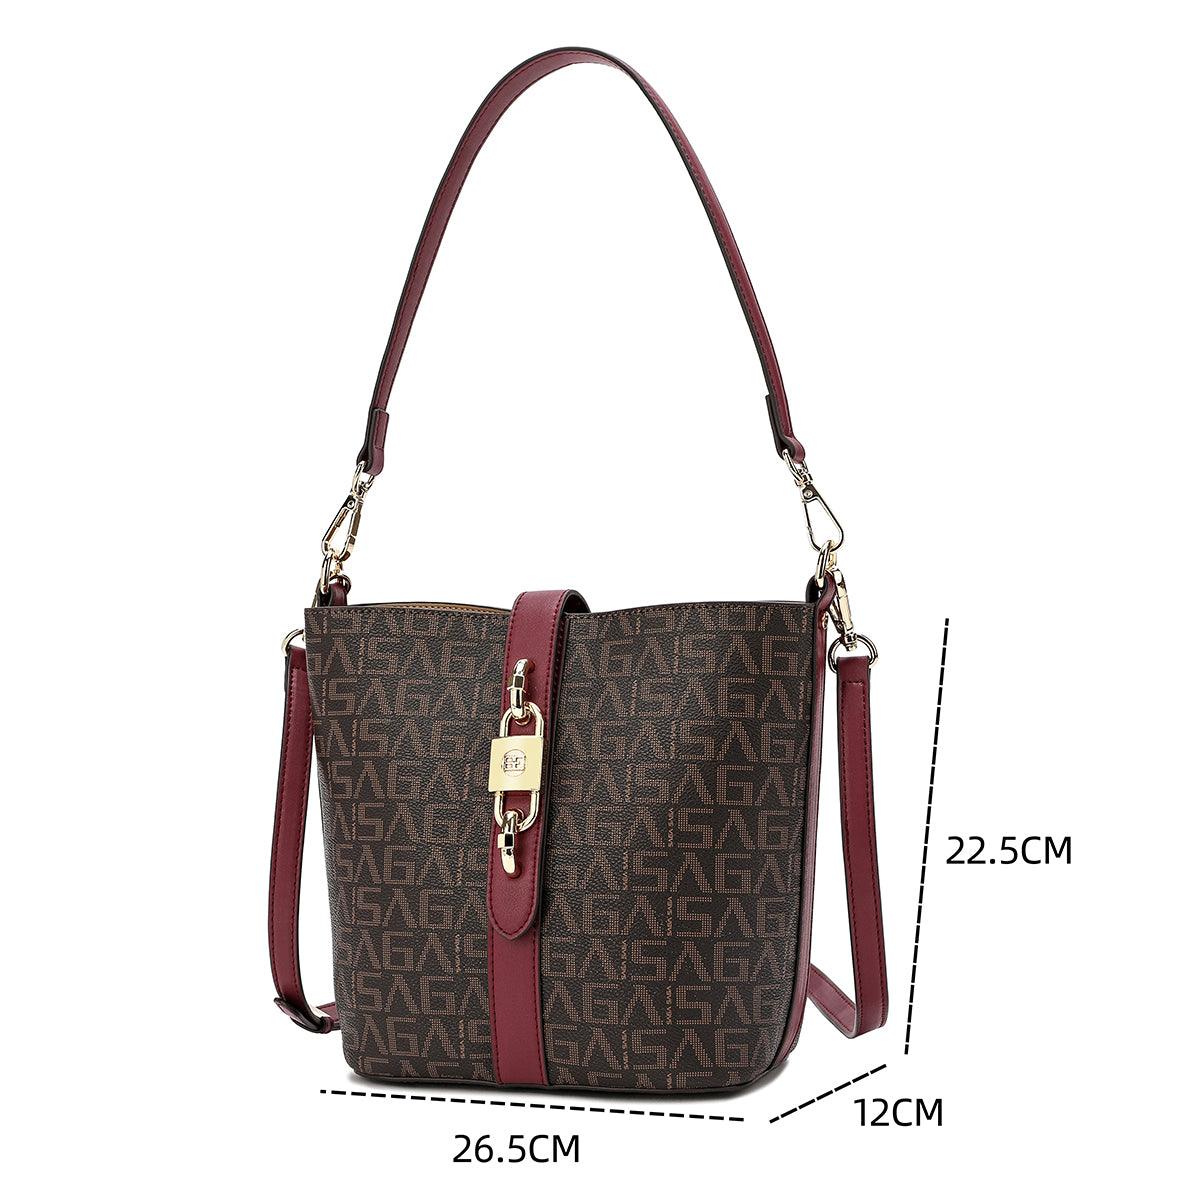 Stylish and distinctive bag for women from Saga, with Saga logo embossed and long straps, maroon color